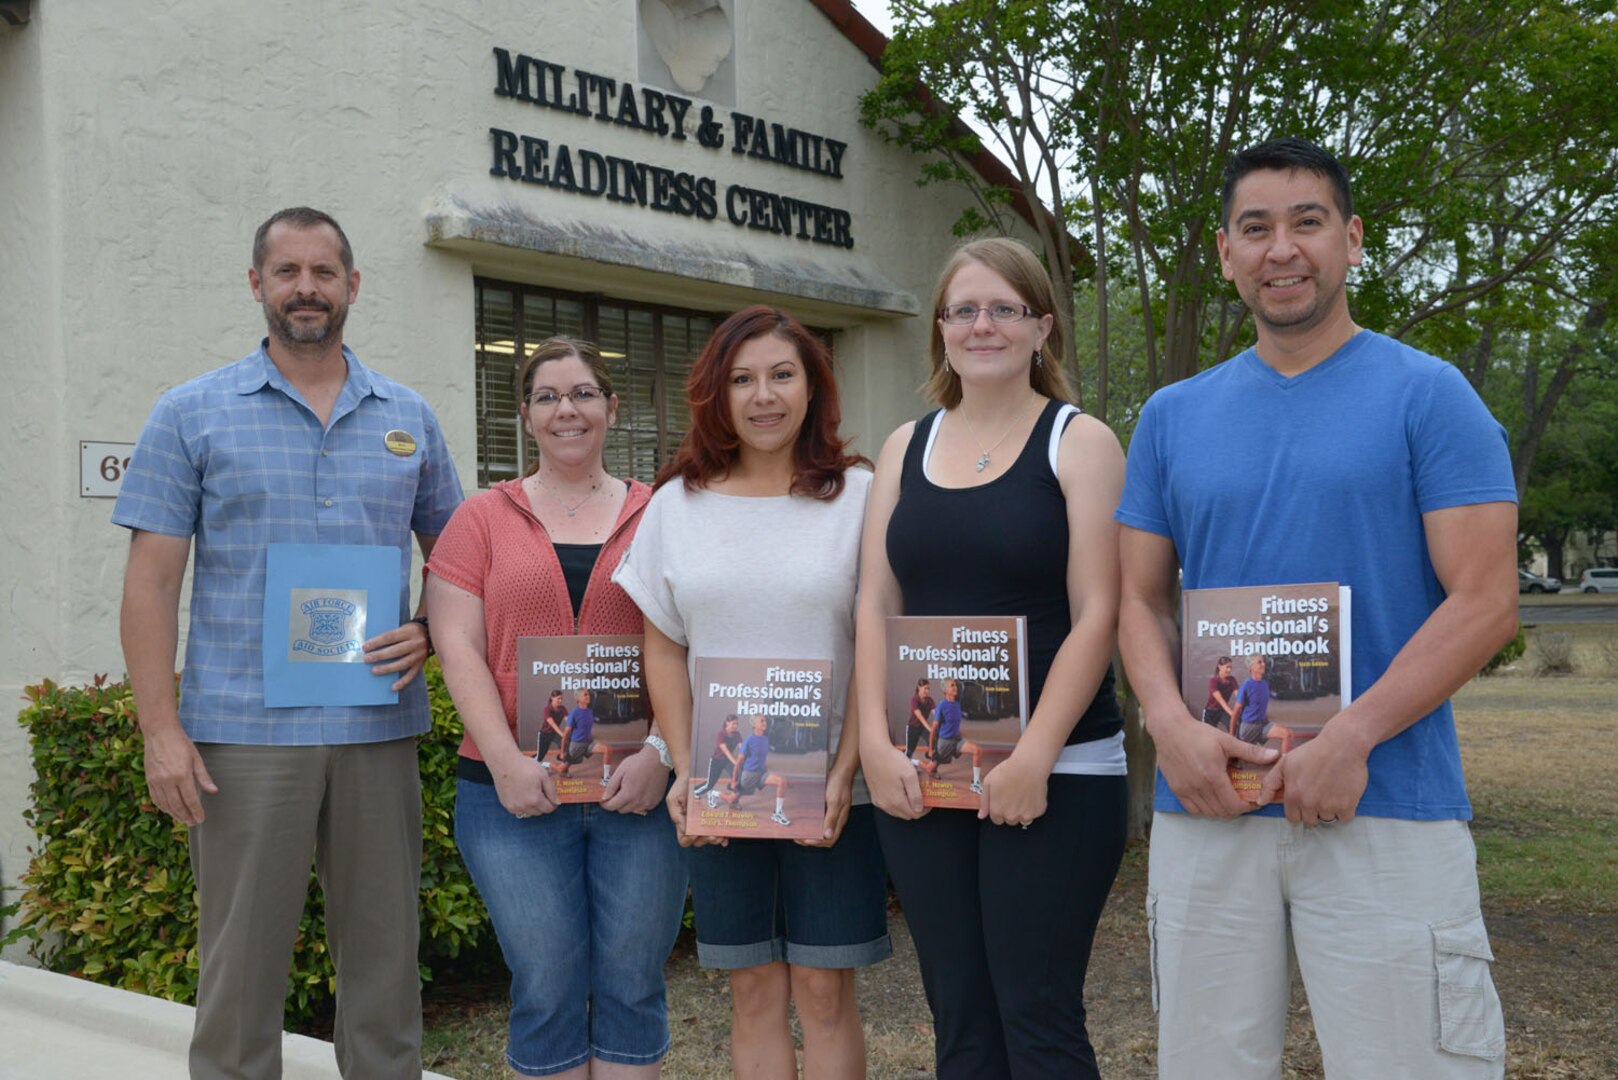 From left: Mike Bell, Joint Base San Antonio-Randolph Military & Family Readiness Center Air Force Aid officer, stands with Air Force Aid Society scholarship winners April Johnson, Candice Hollingsworth, Amanda Asselin and Pedro Gonzales, who received scholarships to become certified personal trainers May 6 at JBSA-Randolph. The Air Force Aid Society is the official charity of the U.S. Air Force. It promotes the Air Force mission by helping to relieve distress of Air Force members and their families and assist them to finance their education.
(U.S. Air Force photo by Joel Martinez)

